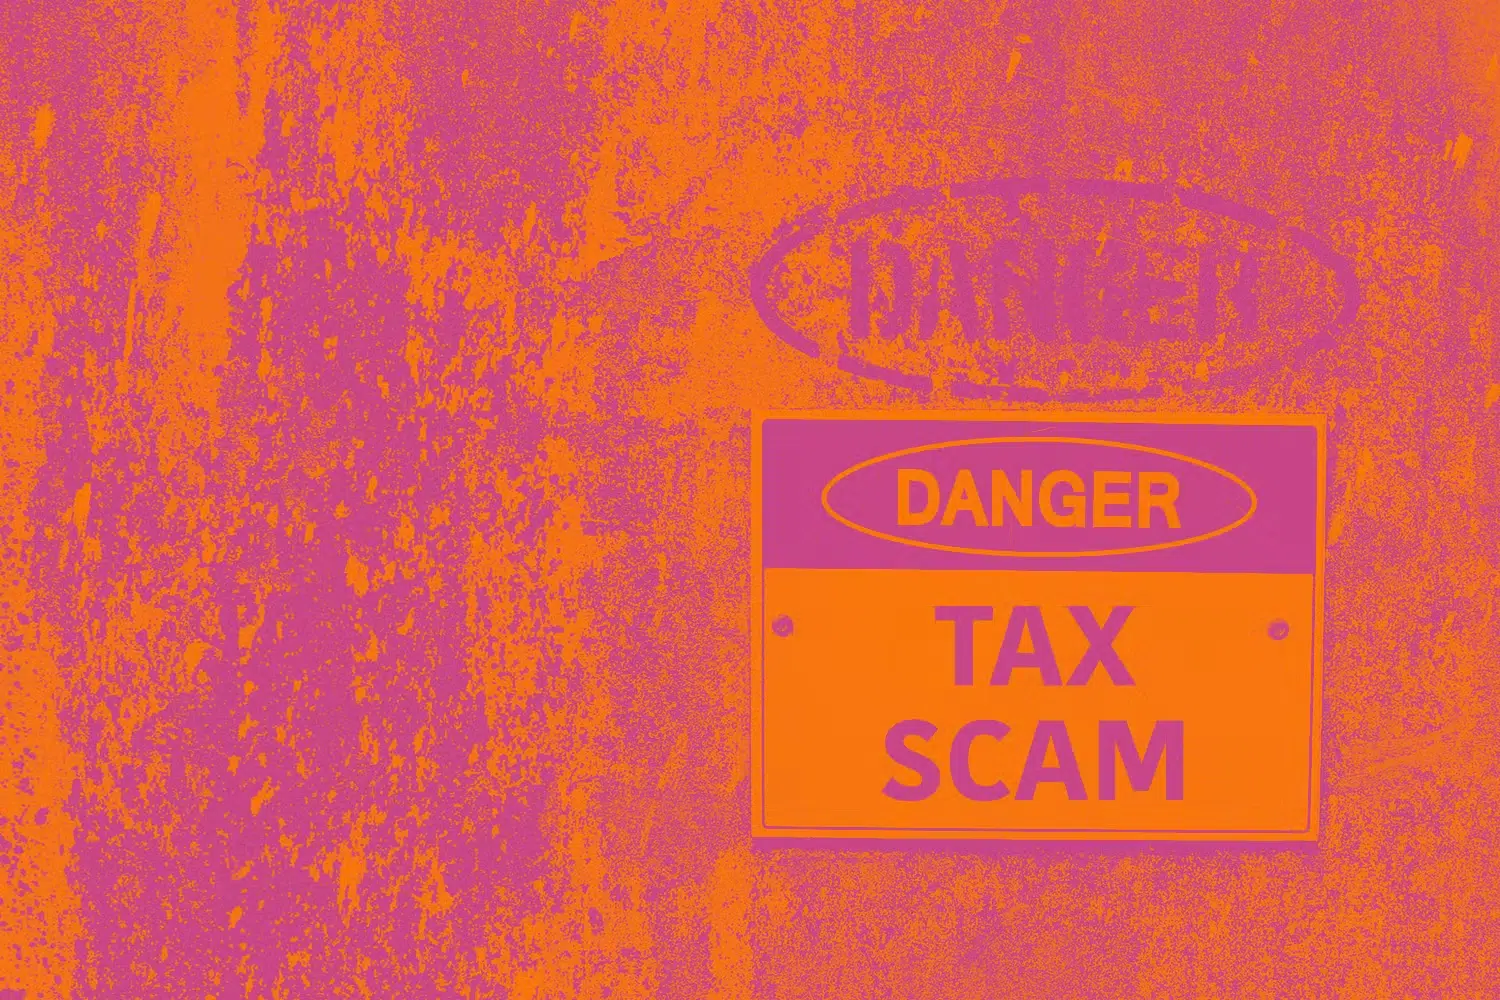 Danger sign with the word "TAX SCAM" written on it